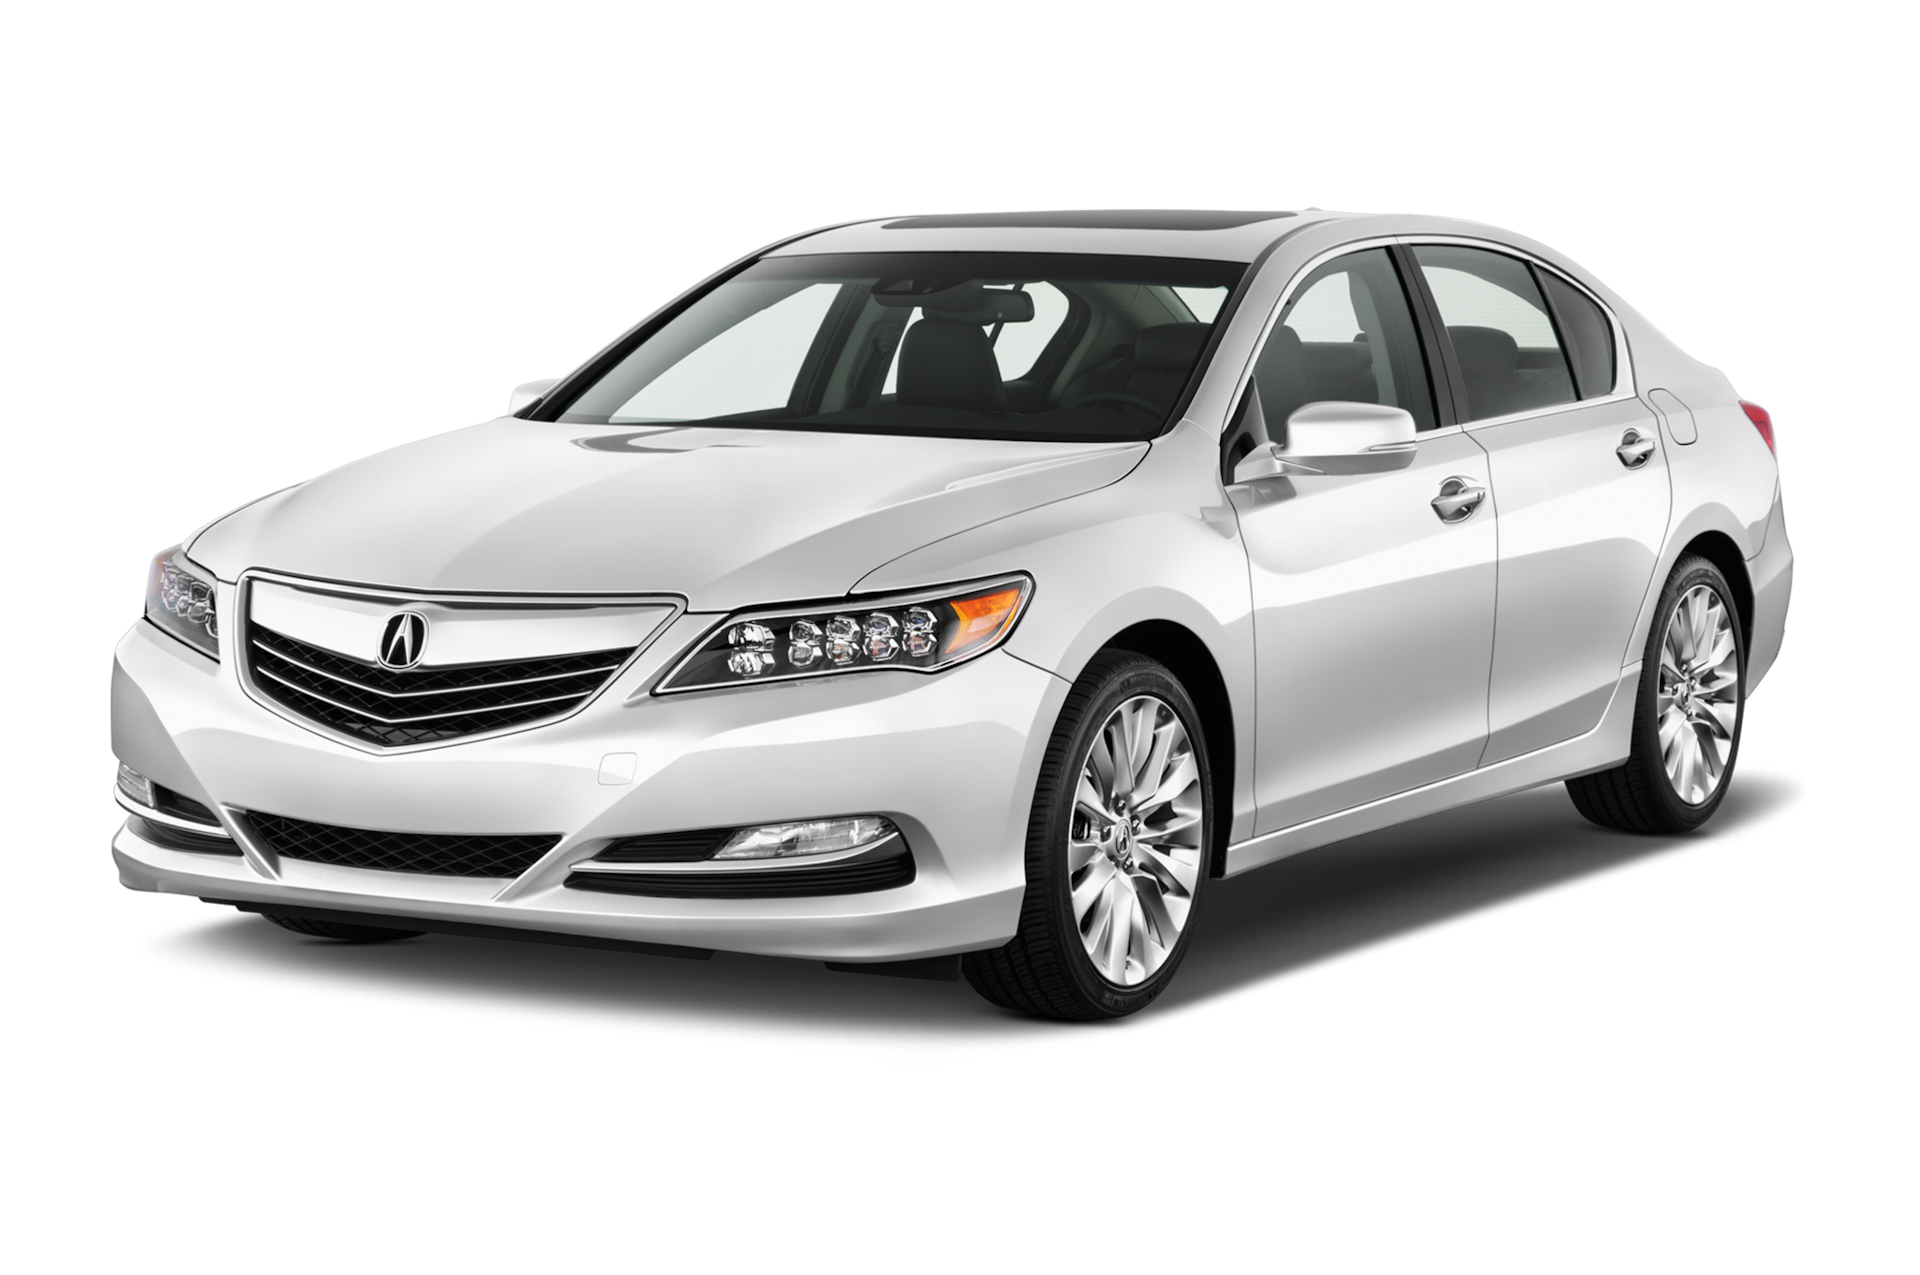 2015 Acura RLX Prices, Reviews, and Photos - MotorTrend